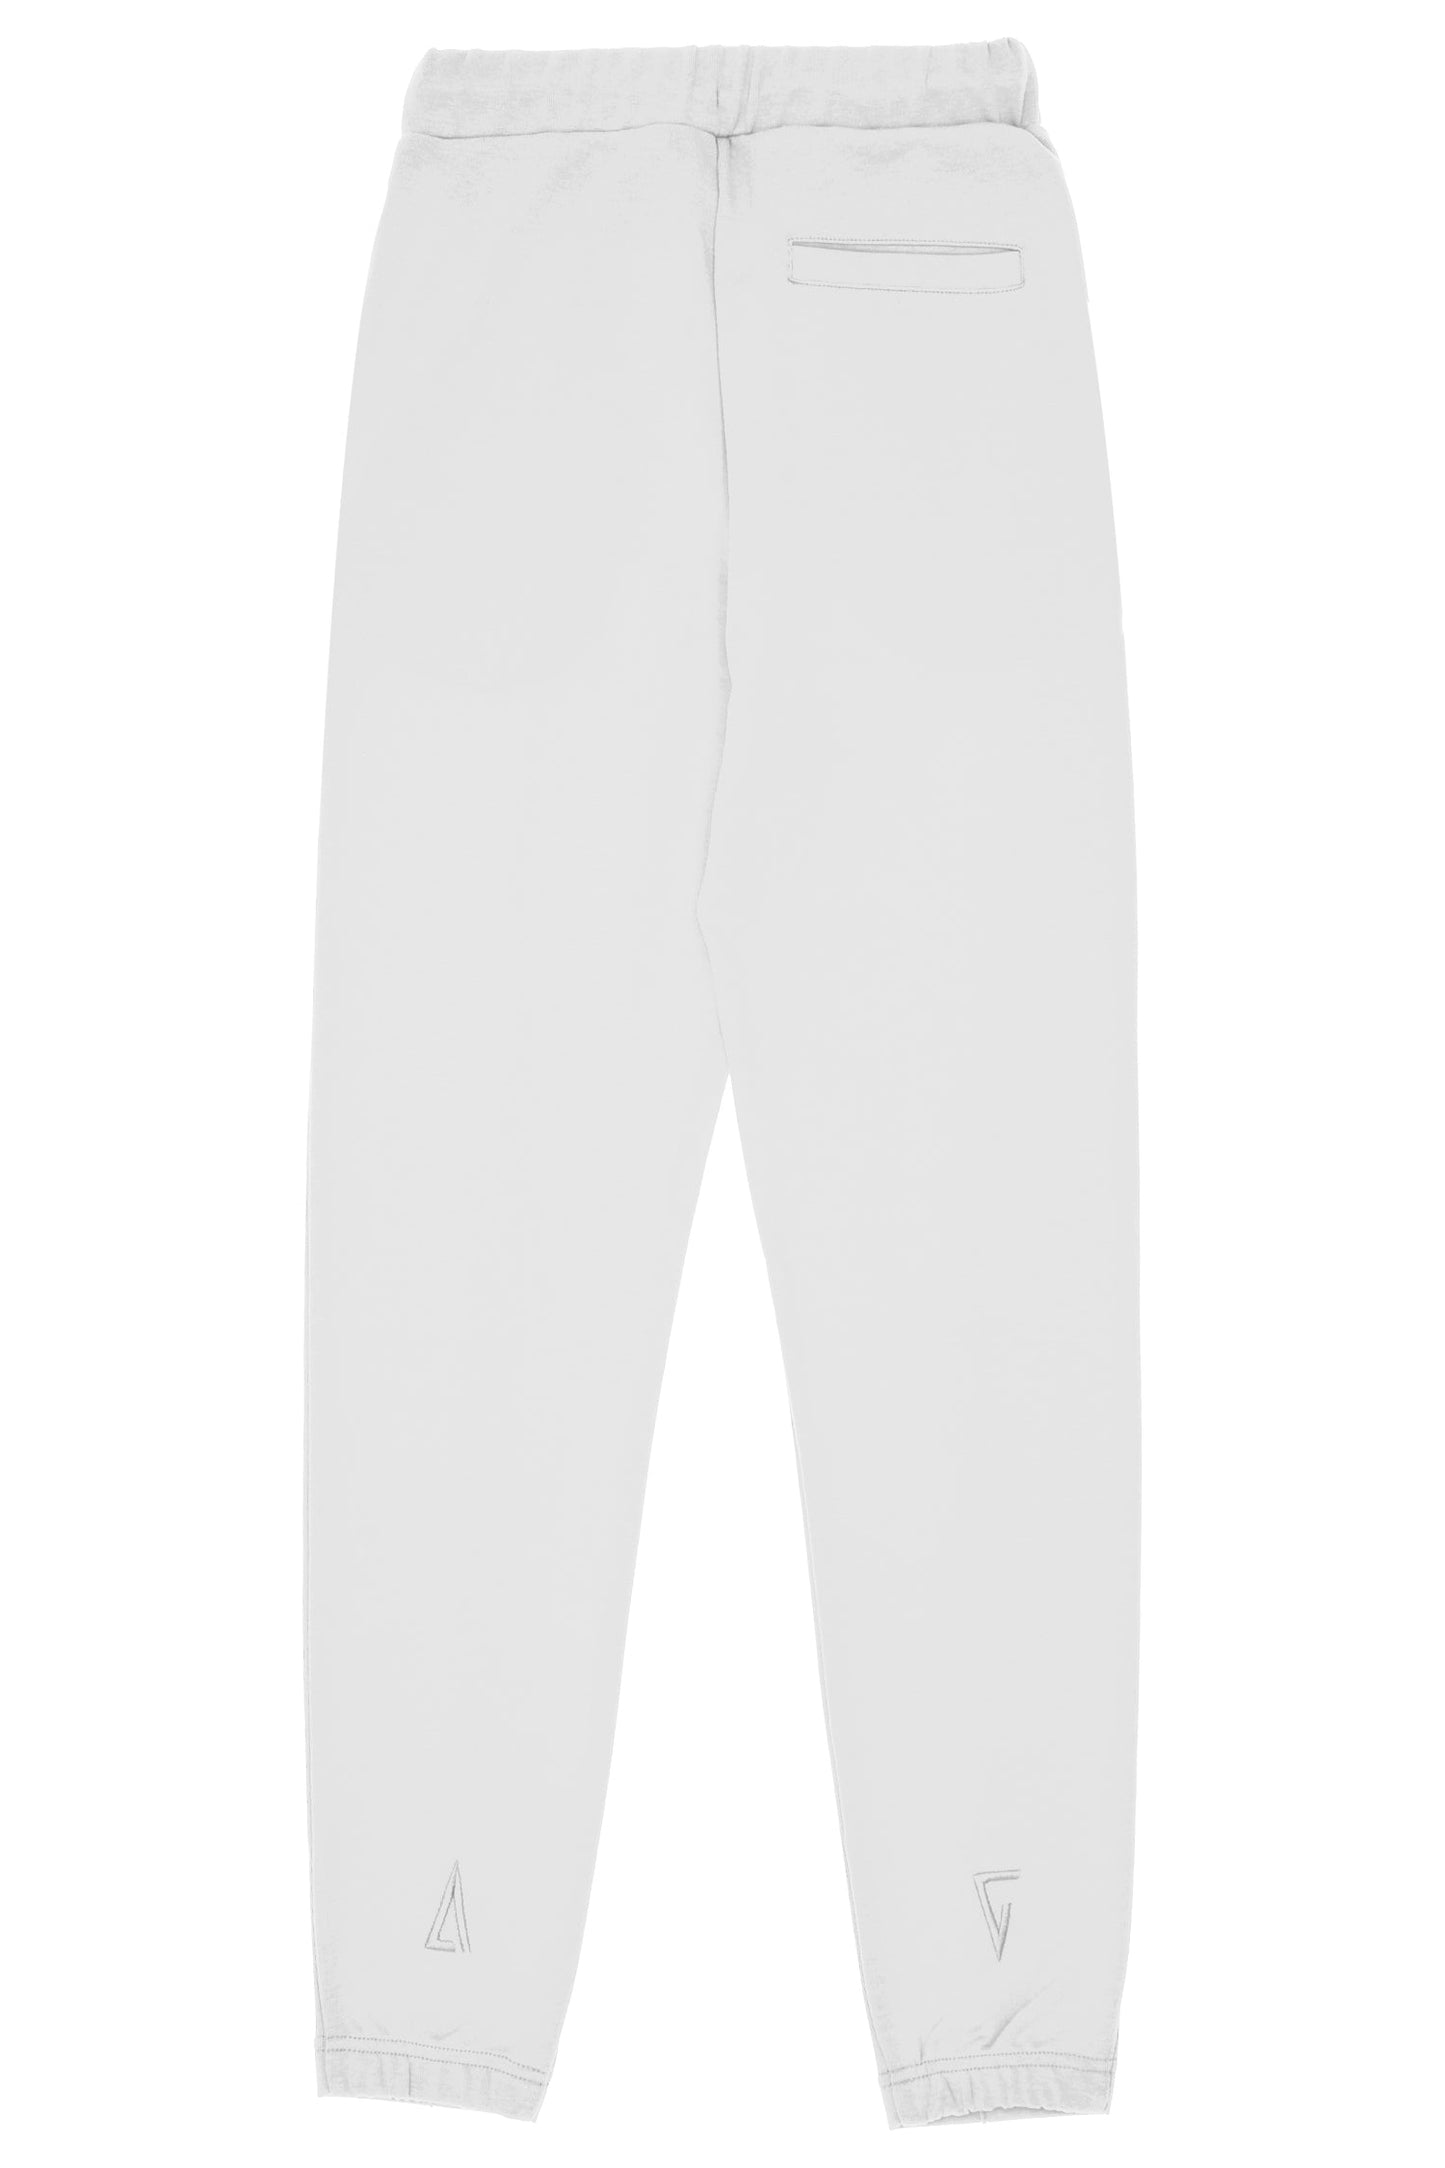 Load image into Gallery viewer, Cotton Skinny Sweatpants - Eggshell
